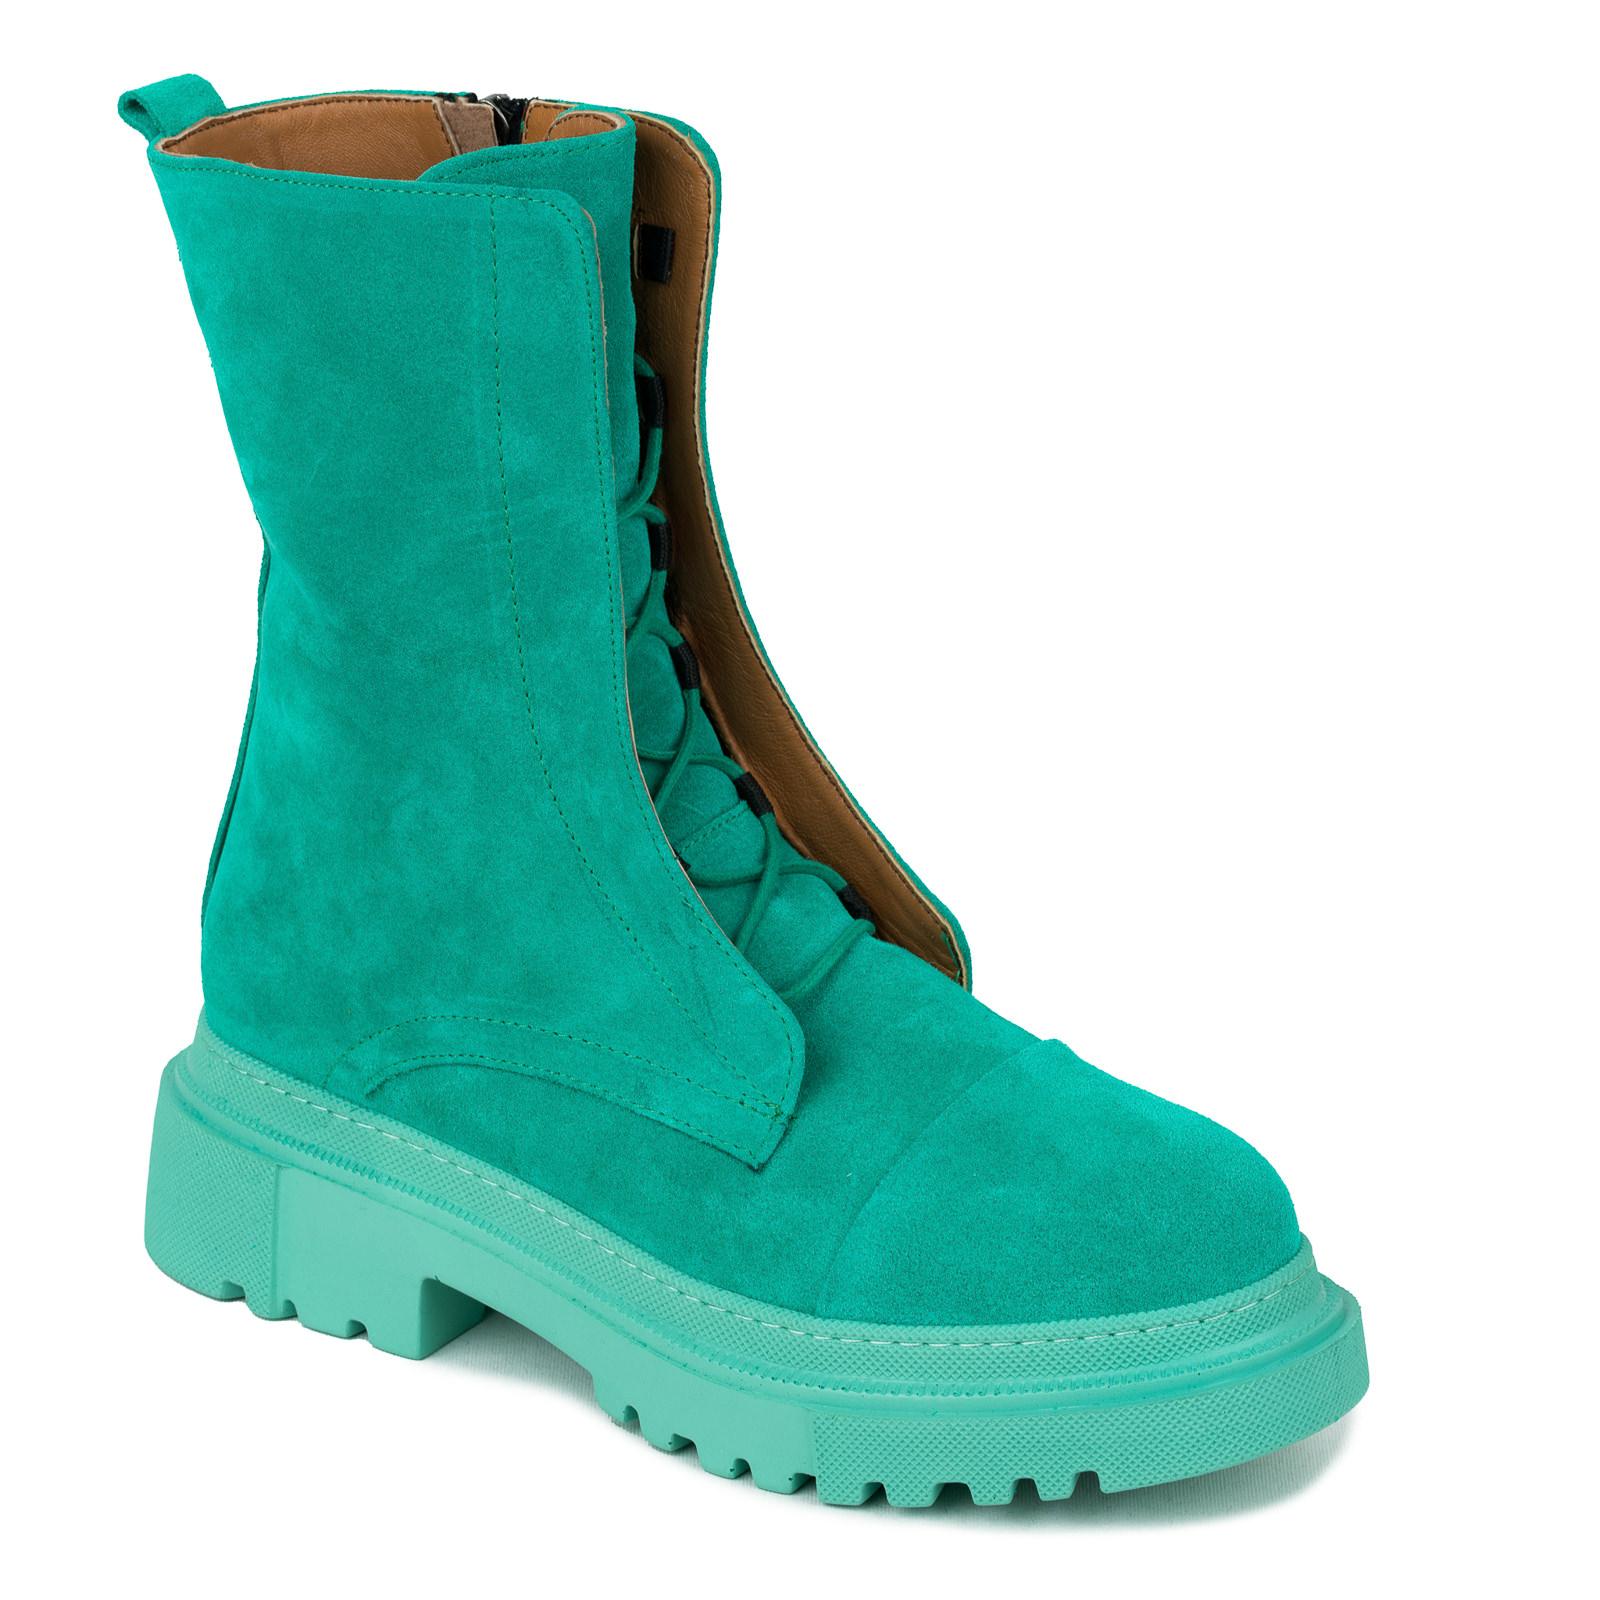 Leather booties B244 - TURQUOISE